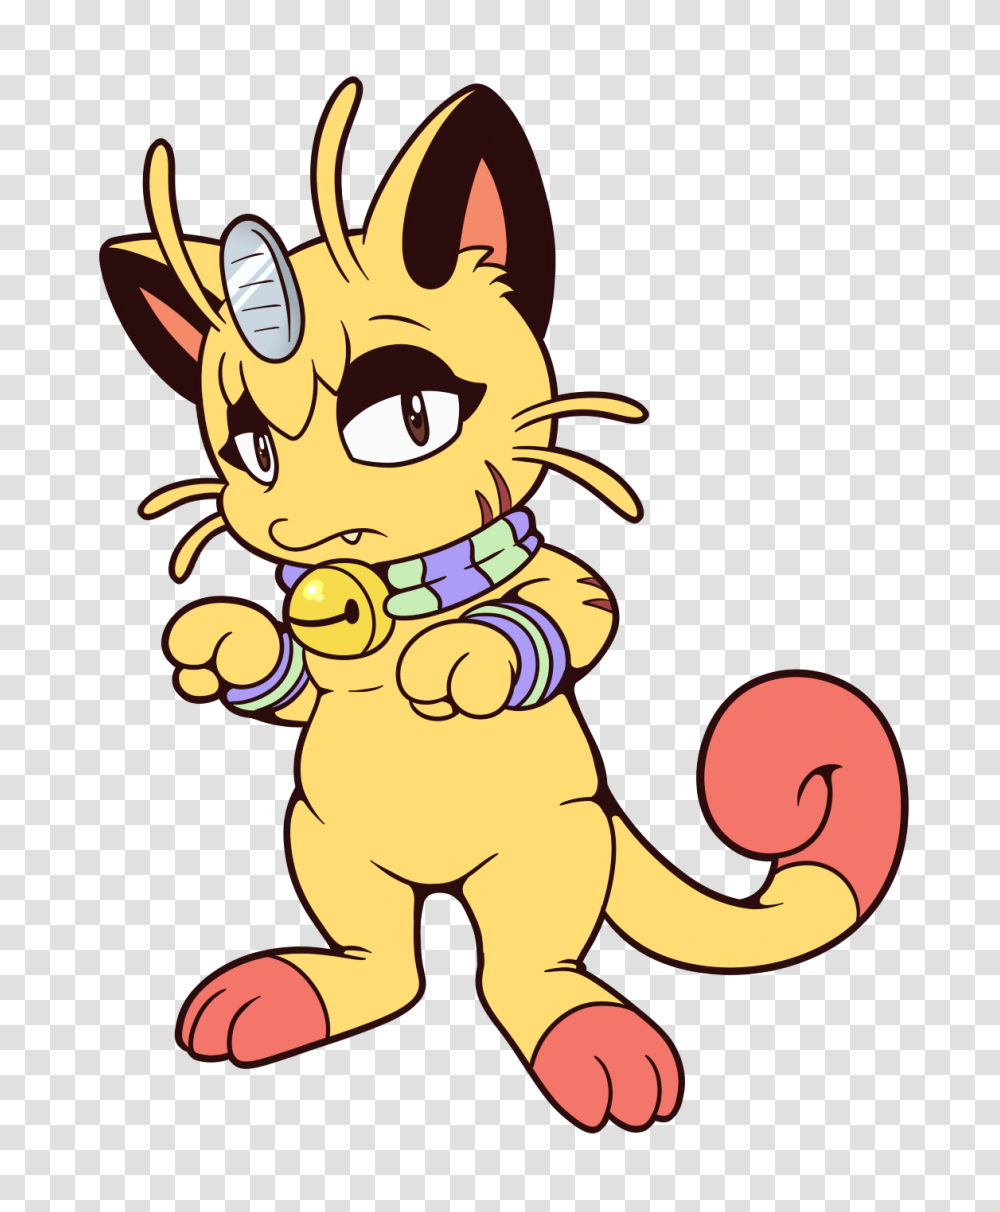 Download Kolette The Meowth Image Pokemon Mystery Dungeon Meowth Oc, Animal, Mammal, Pet, Costume Transparent Png